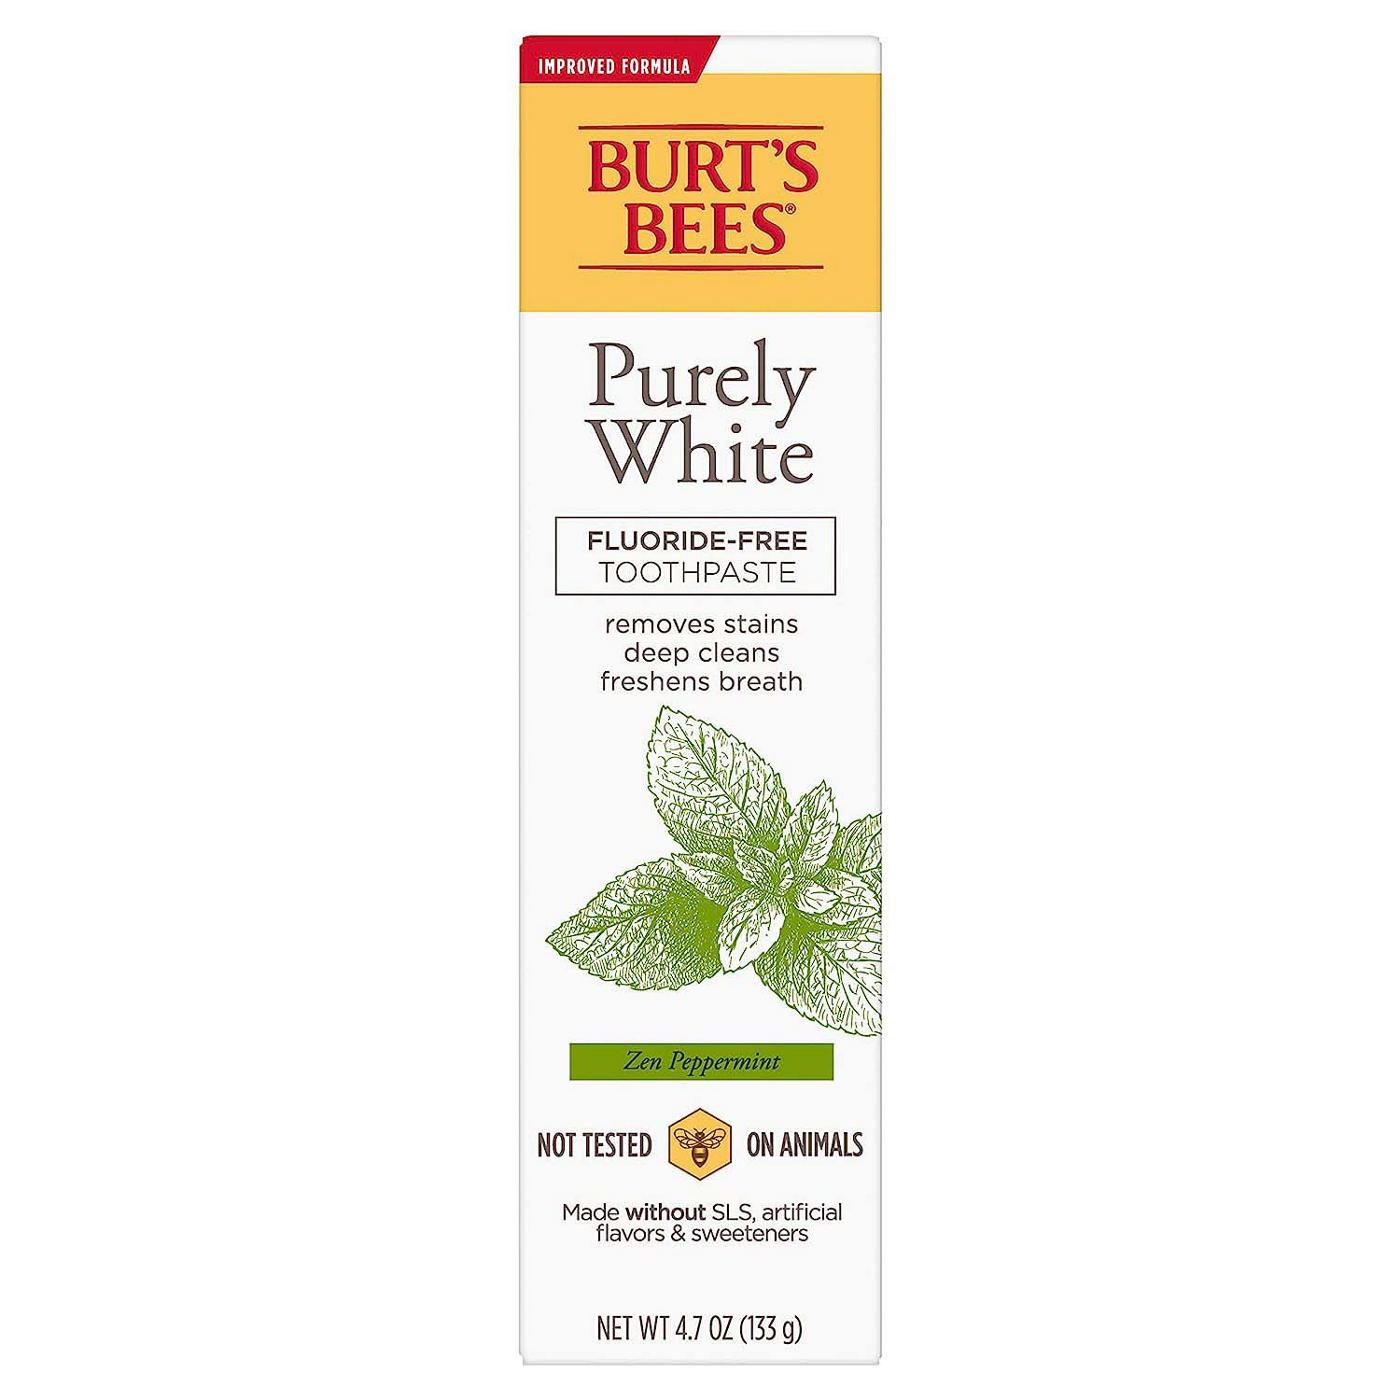 Burt's Bees Purely White Fluoride-Free Toothpaste - Zen Peppermint; image 1 of 8